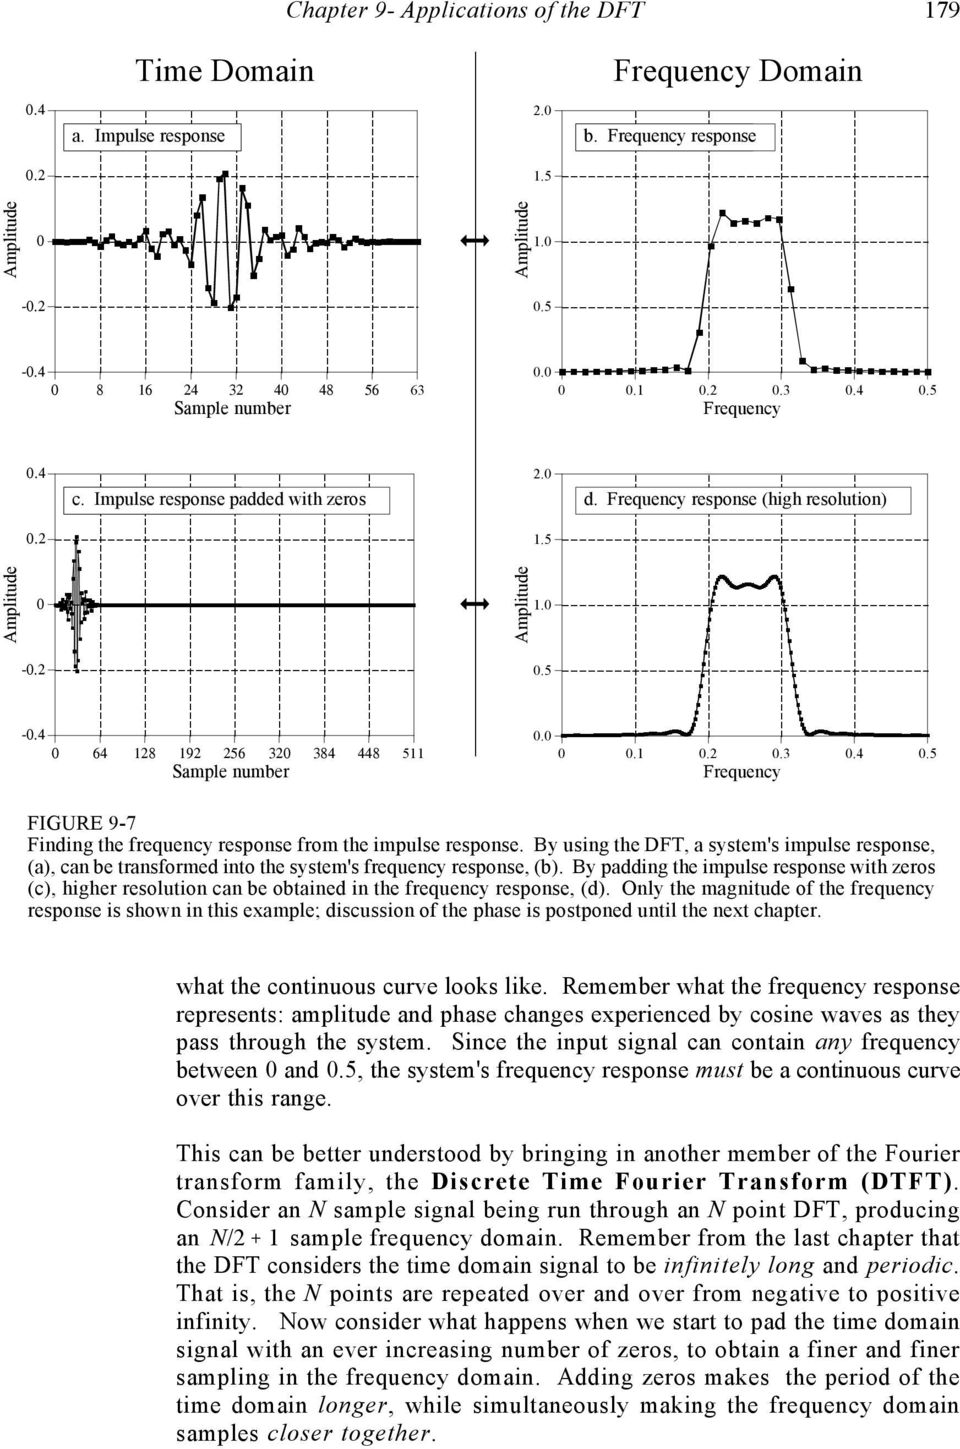 By using the DFT, a system's impulse response, (a), can be transformed into the system's frequency response, (b).